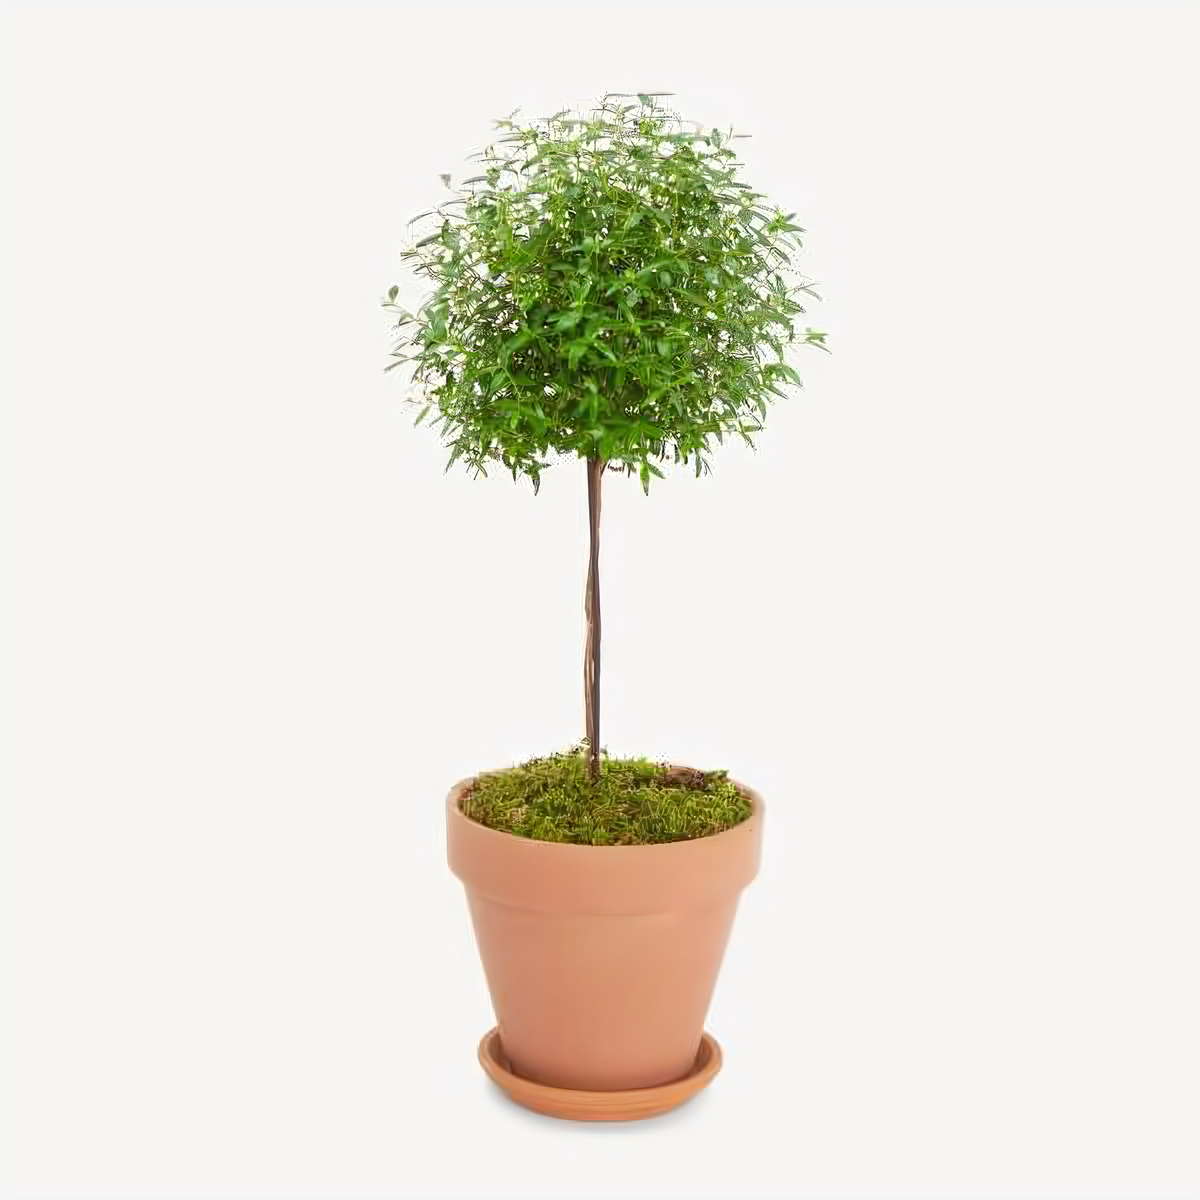 Manhattan Flower Delivery - Myrtle Topiary Tree In Clay Pot - Plants